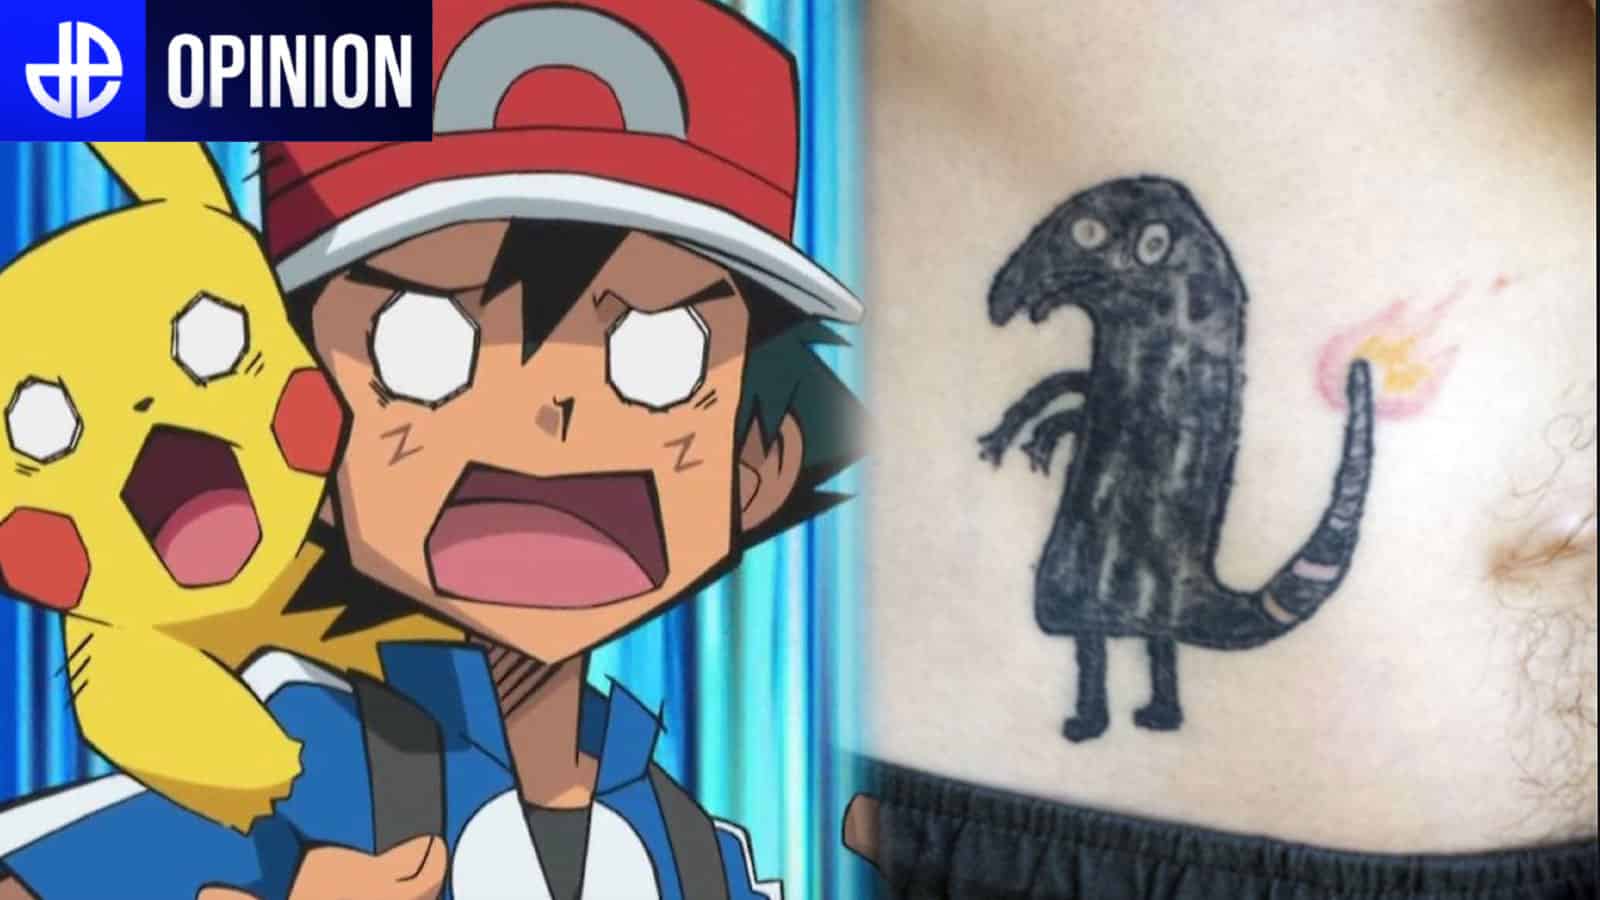 what does this tattoo mean, does it even exist? : r/shittytattoos